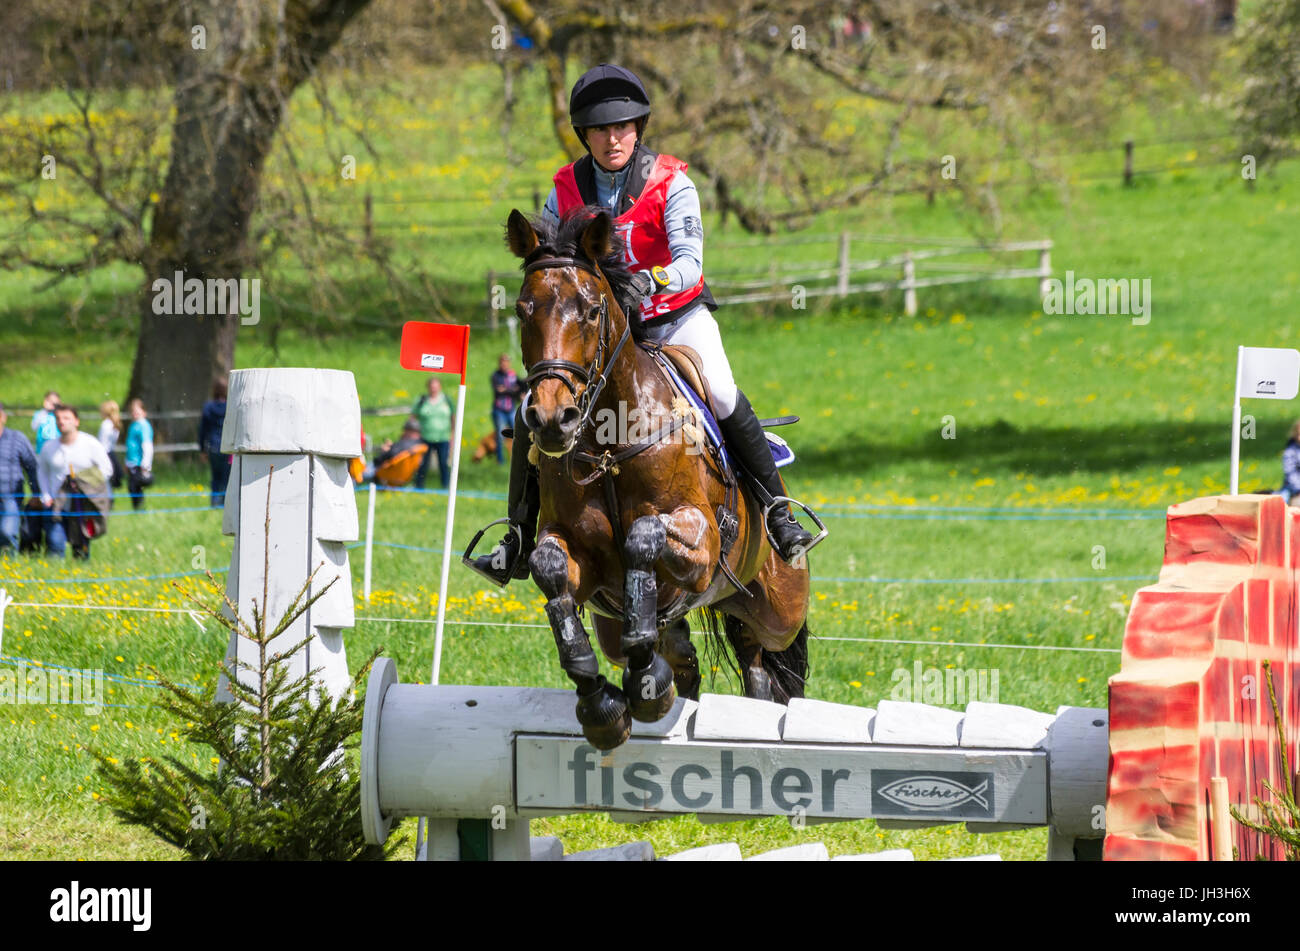 Tamara Acklin on Kontiki, cross country test of the CIC 3* competition at the International Marbach Eventing 2017 Stock Photo